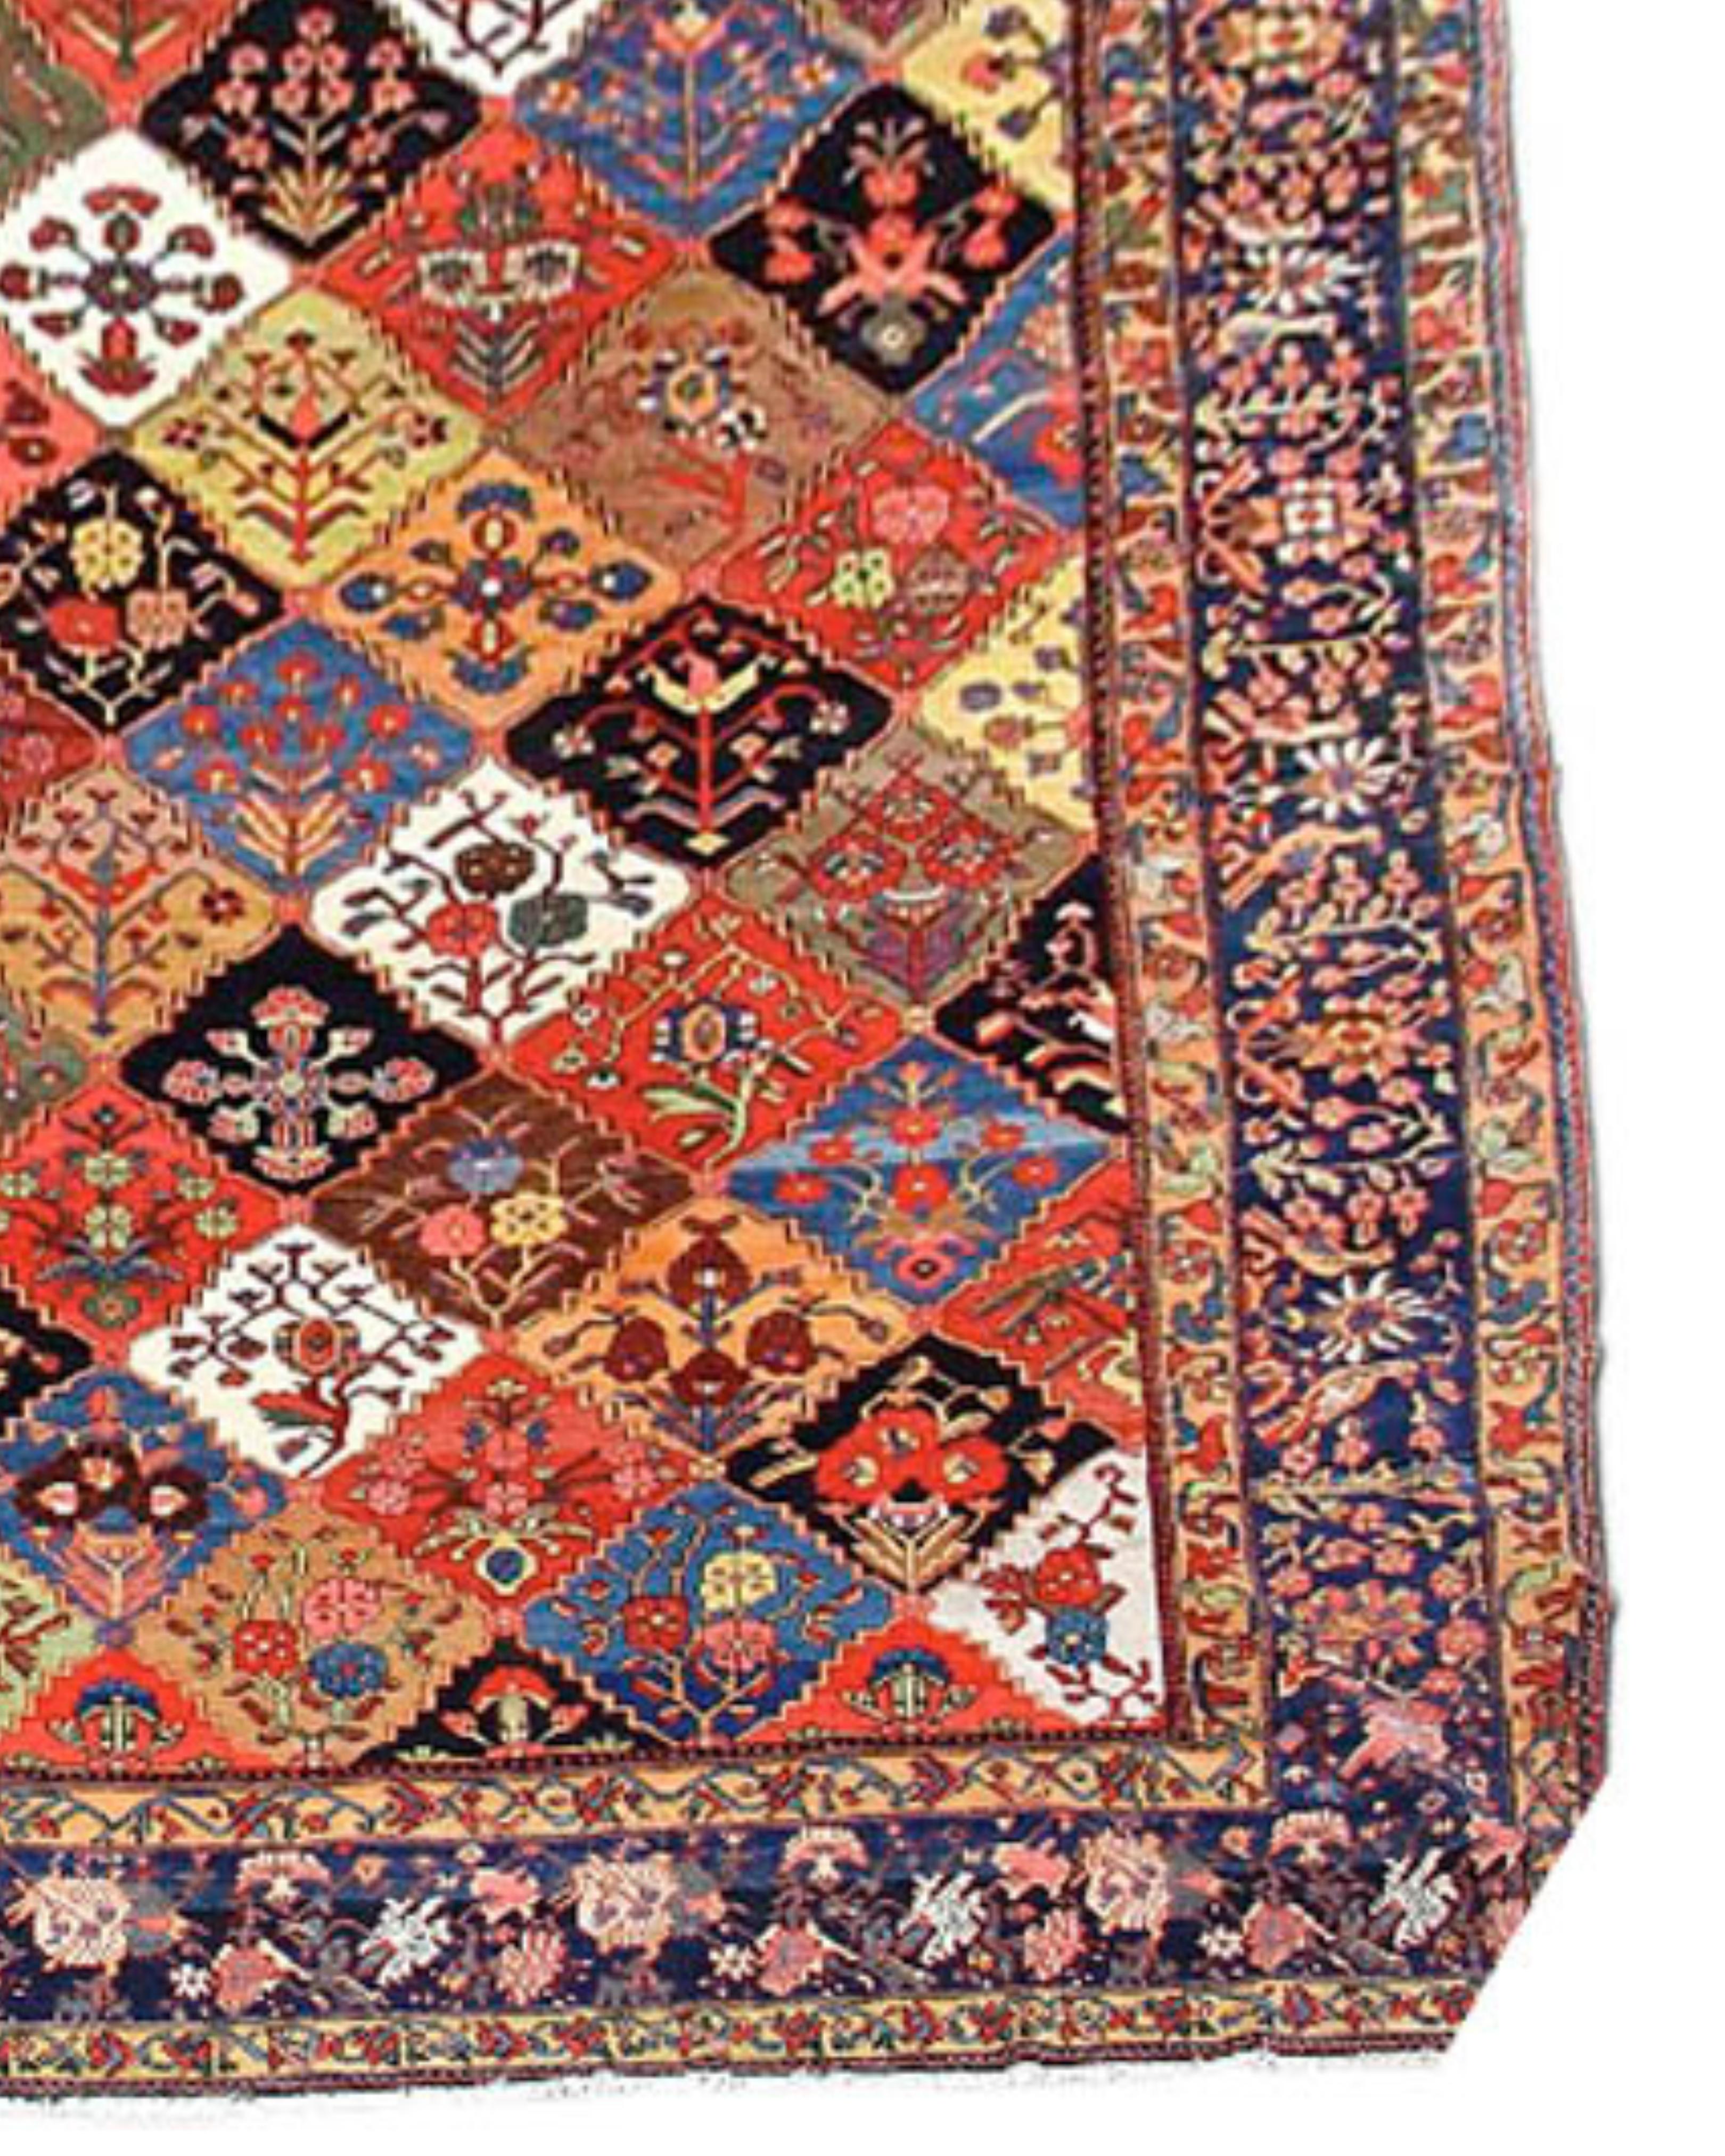 Antique Large Oversized Persian Bakhtiari Carpet, Early 20th Century

Bakhtiari carpets from west-central Persia frequently make use of fields with colorful repeating boxes containing flowering plants. This piece, however, transcends the genre.